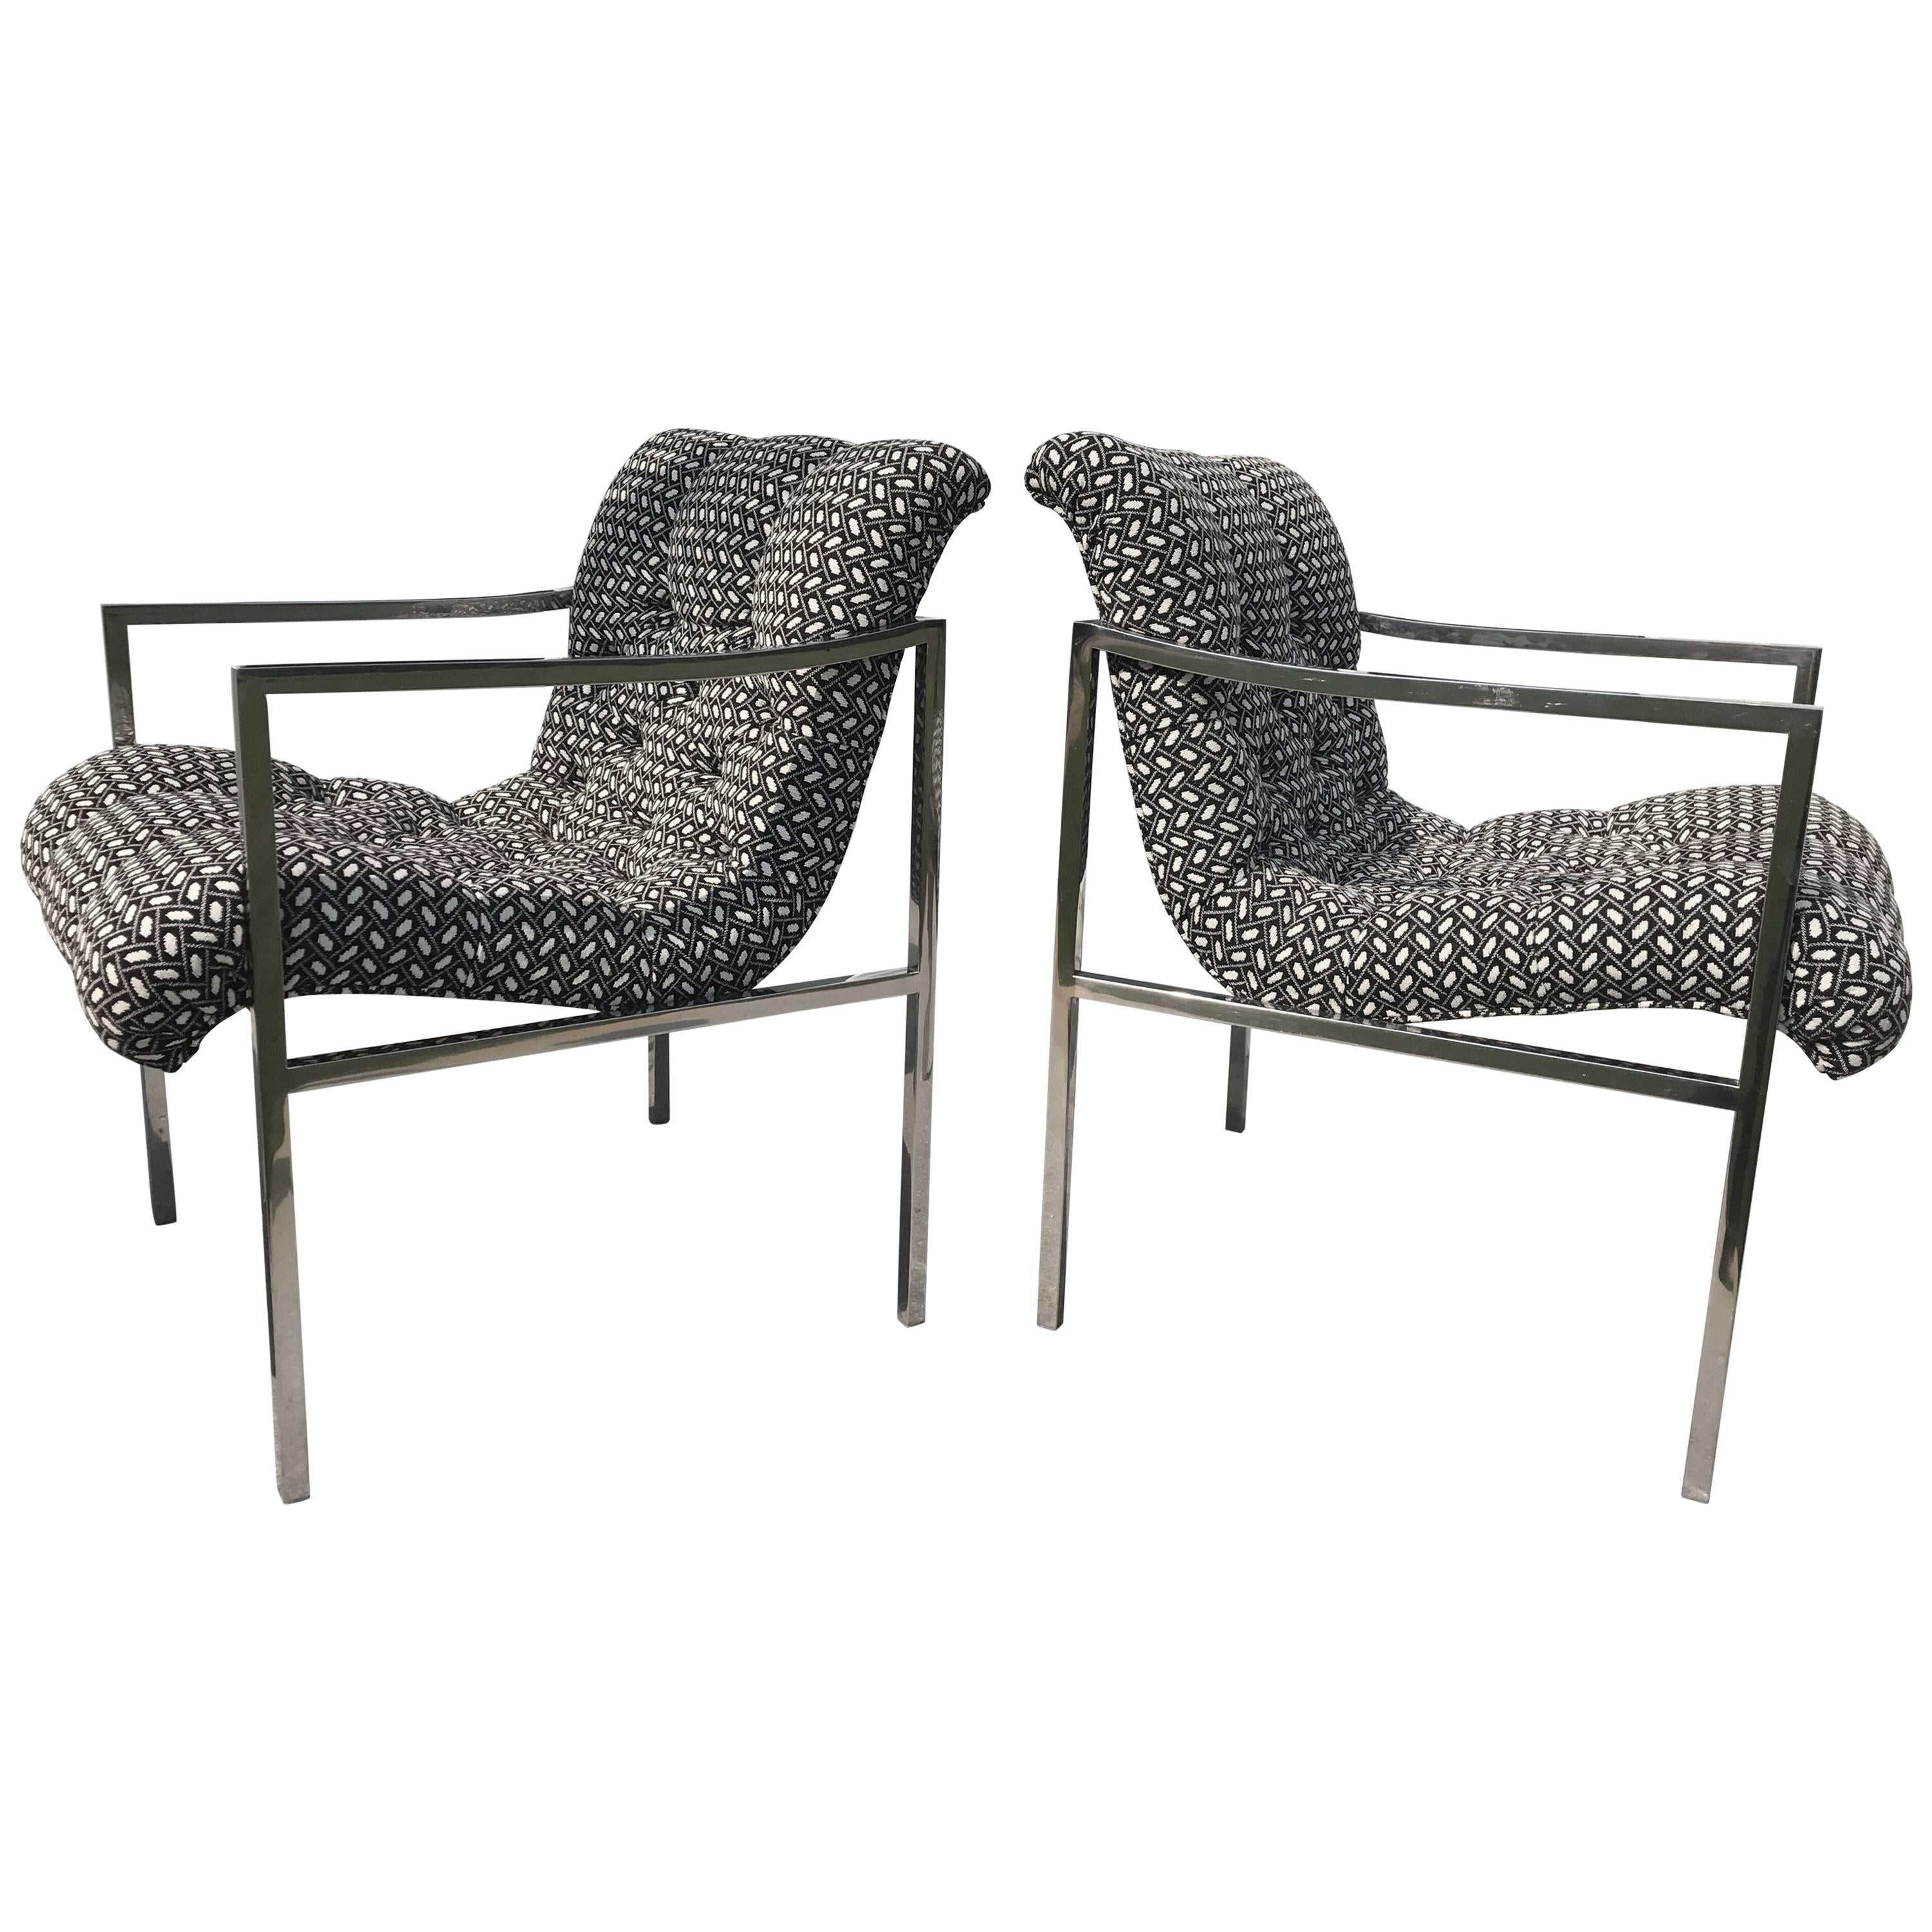 Stow & Davis Scoop Chairs in a Black and White Uphlstery